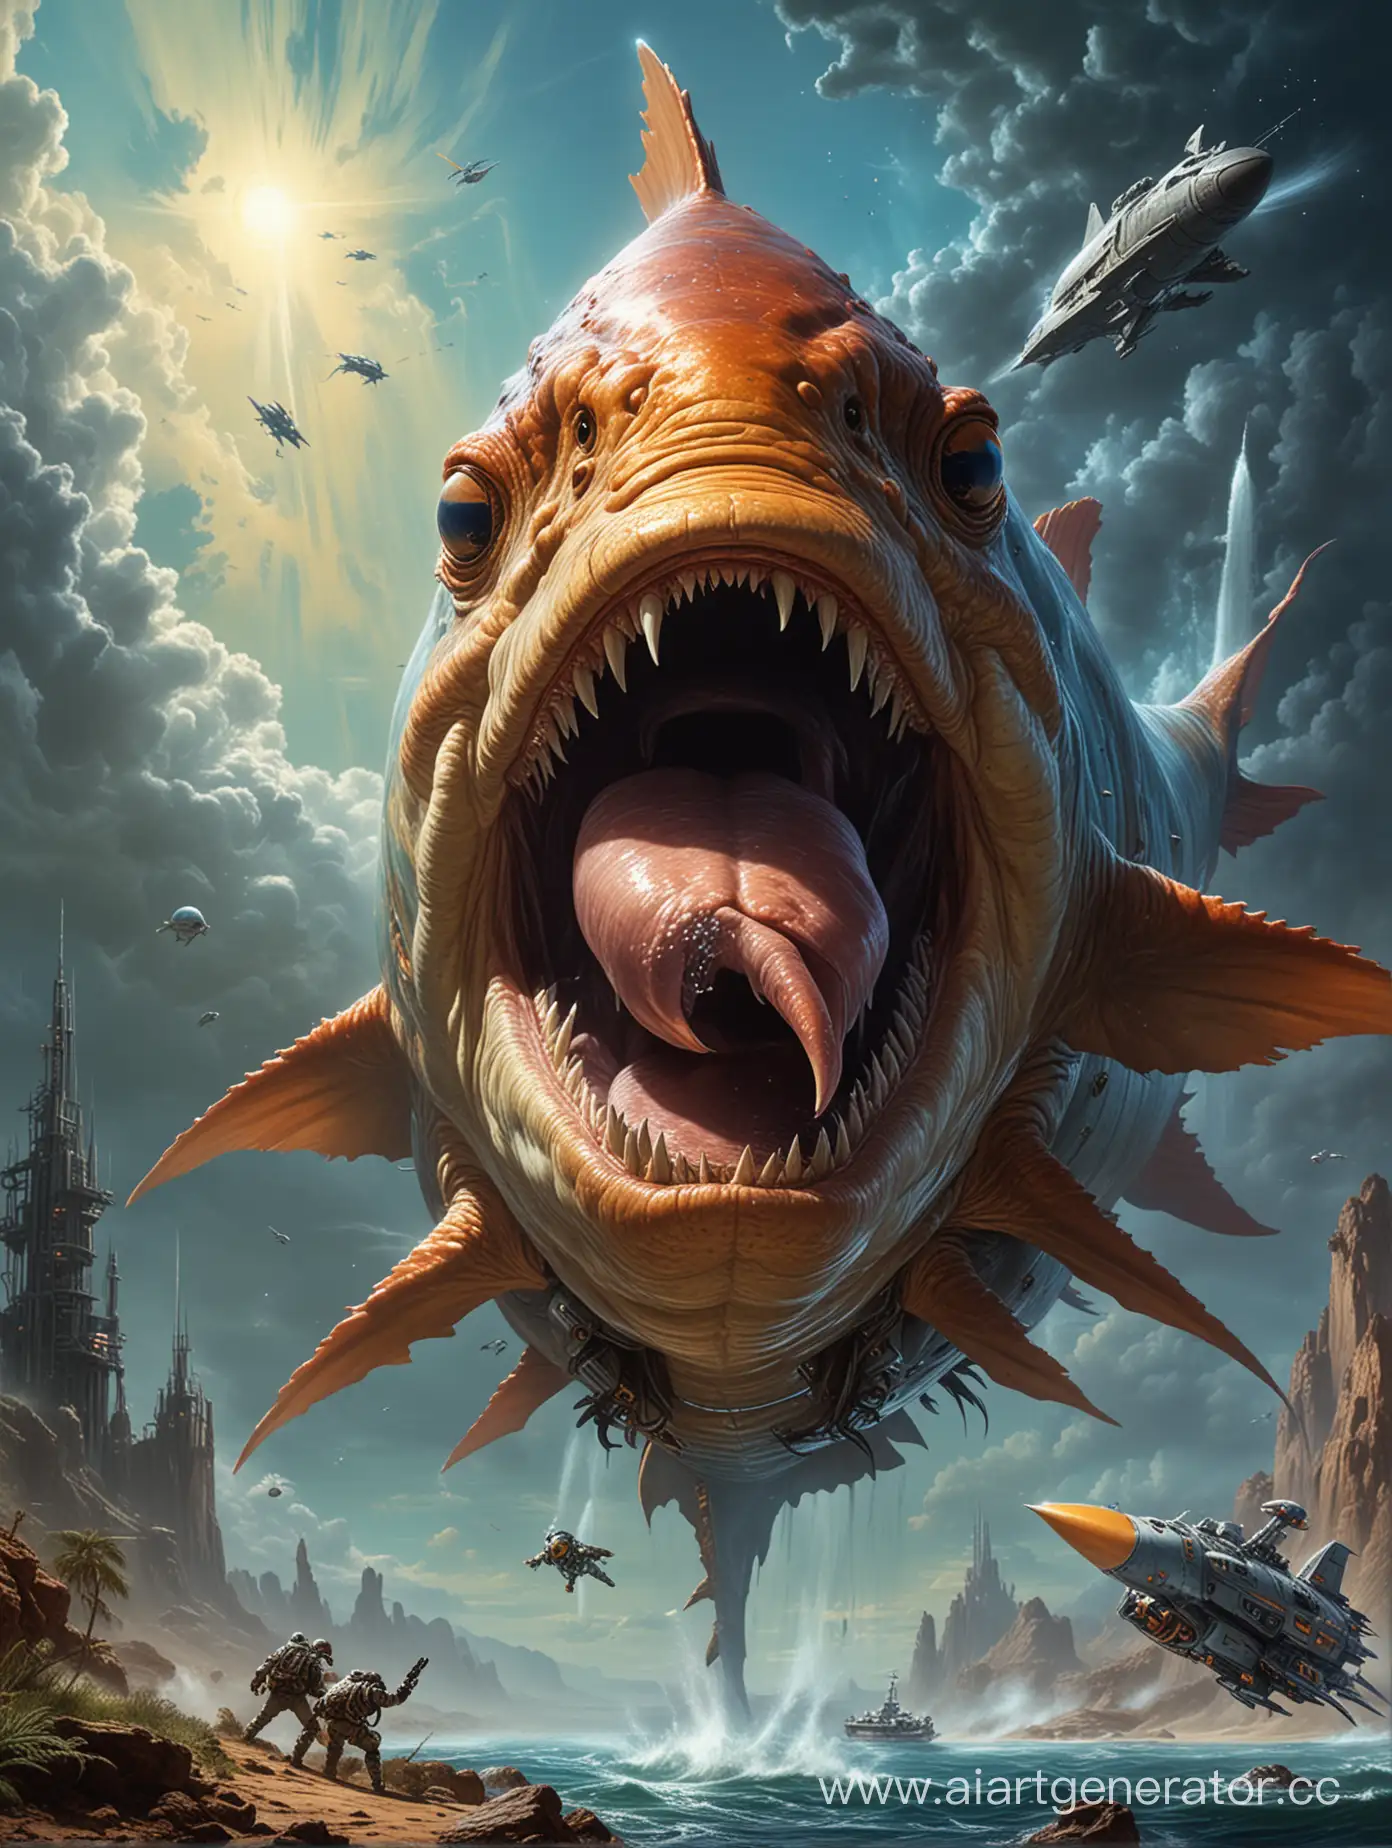 A huge fish-like creature is in the background, on the left side. It is swallowing a spaceship. The image is painted in the style of Boris Vallejo's paintings, with photorealistic HDR and natural lighting.